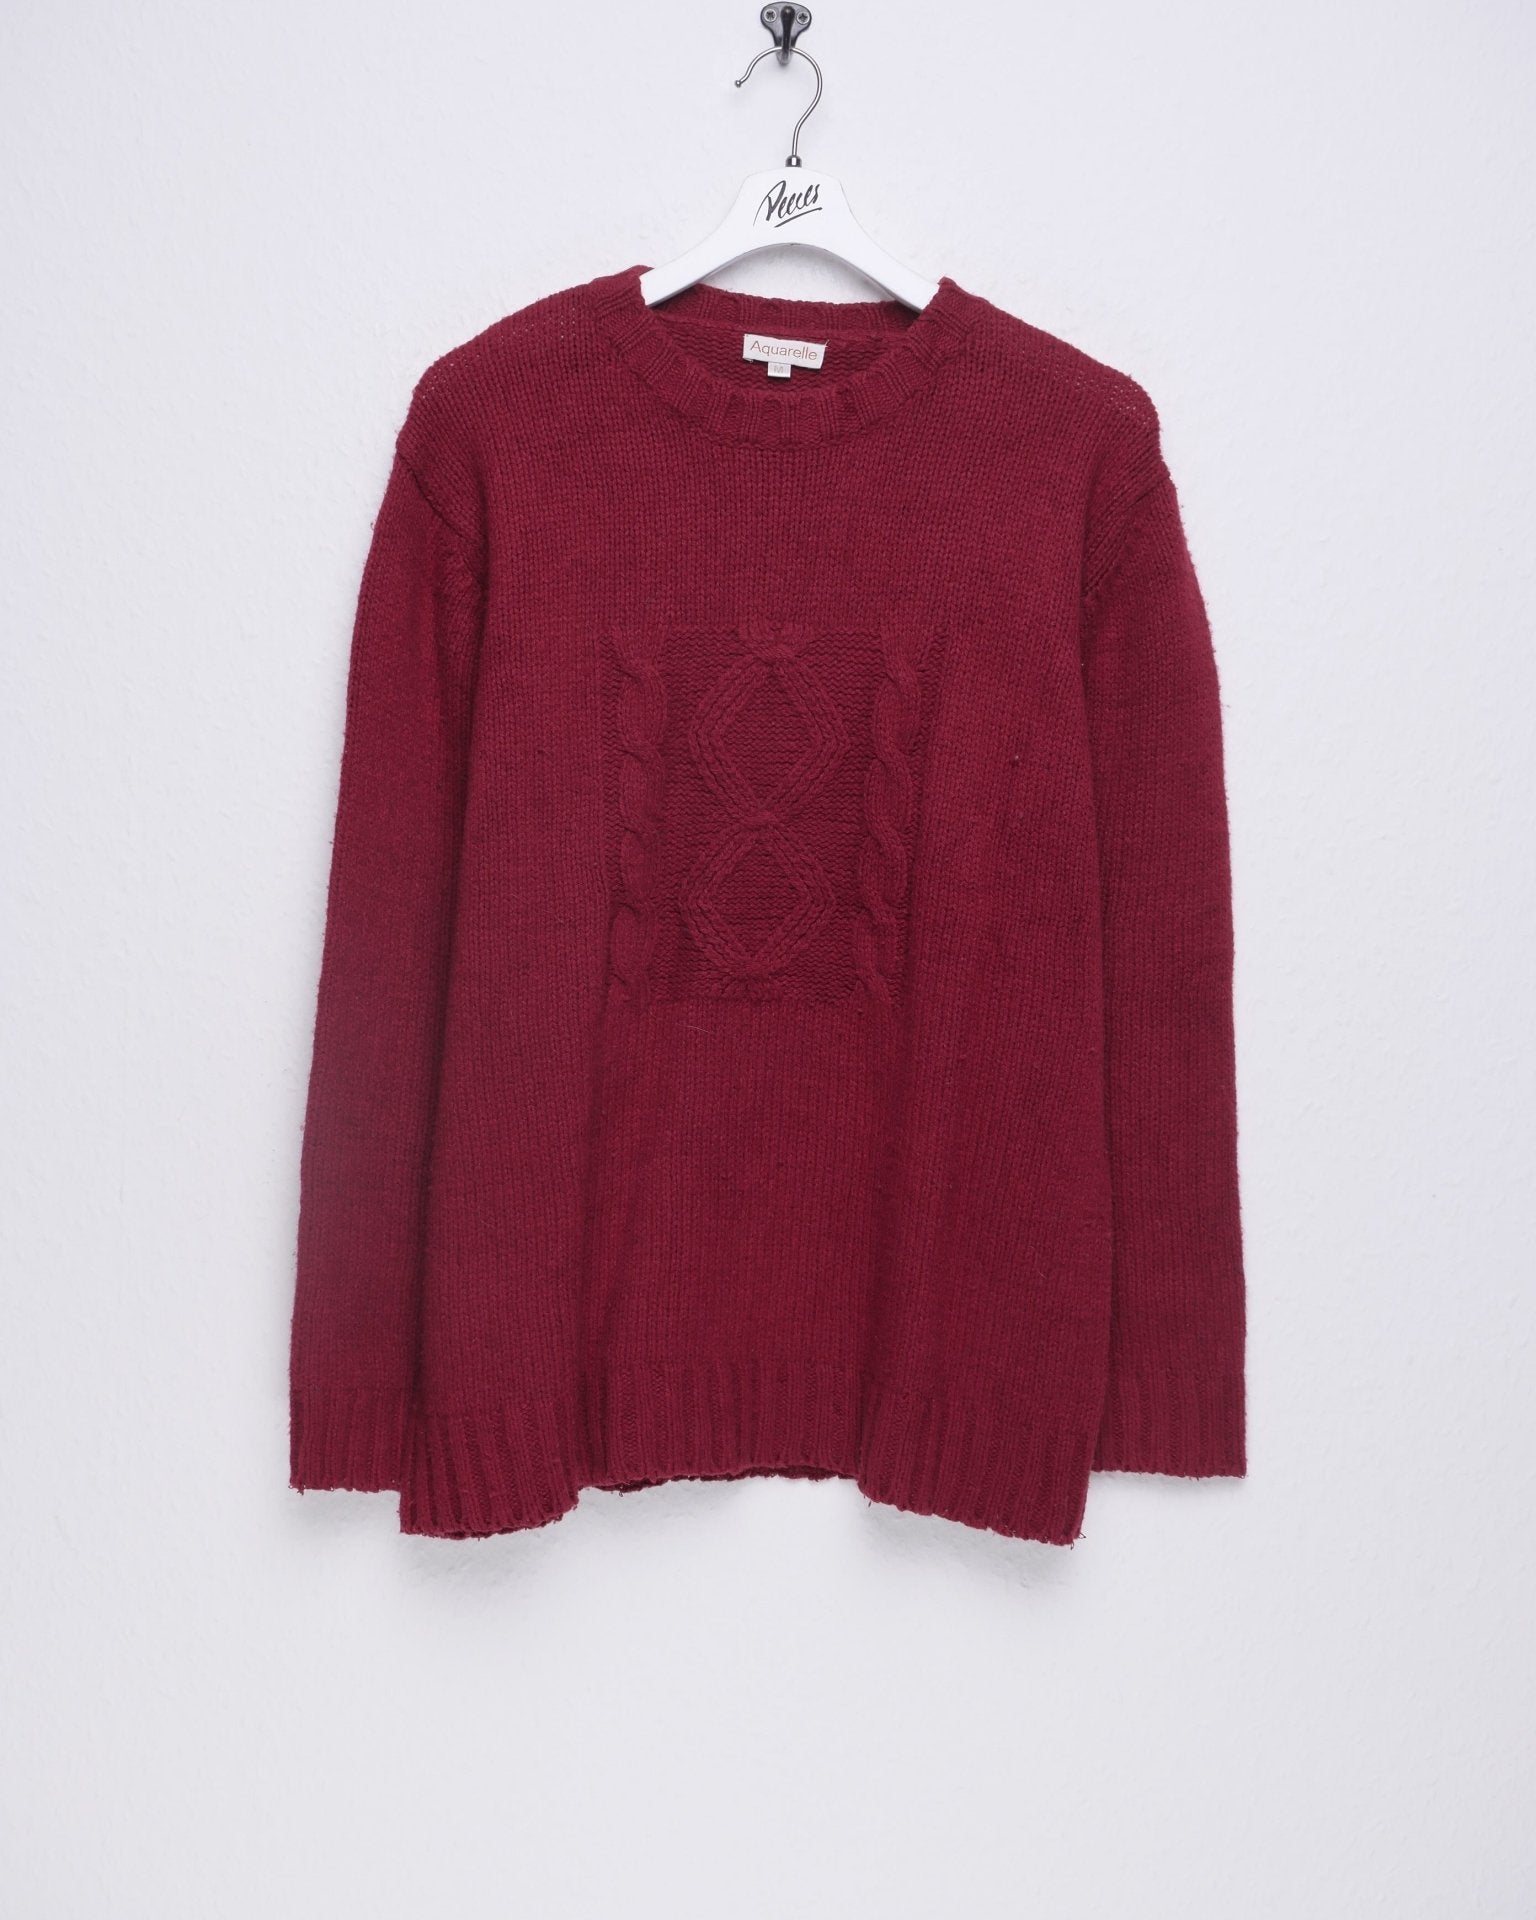 Vintage patterned knit Sweater - Peeces